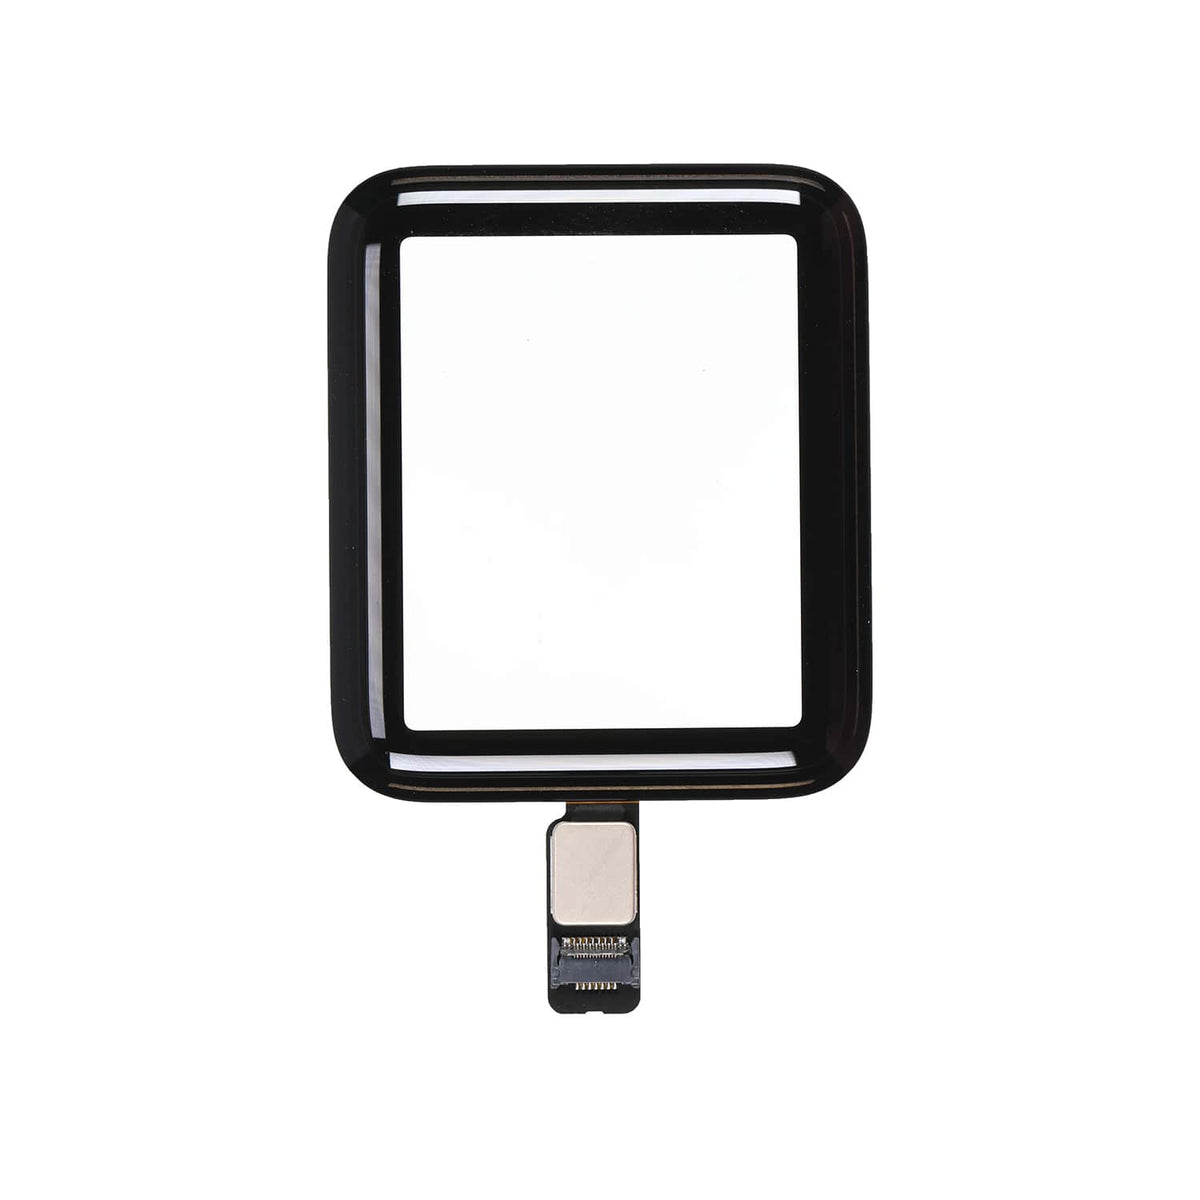 FRONT GLASS LENS FOR APPLE WATCH S2 38MM